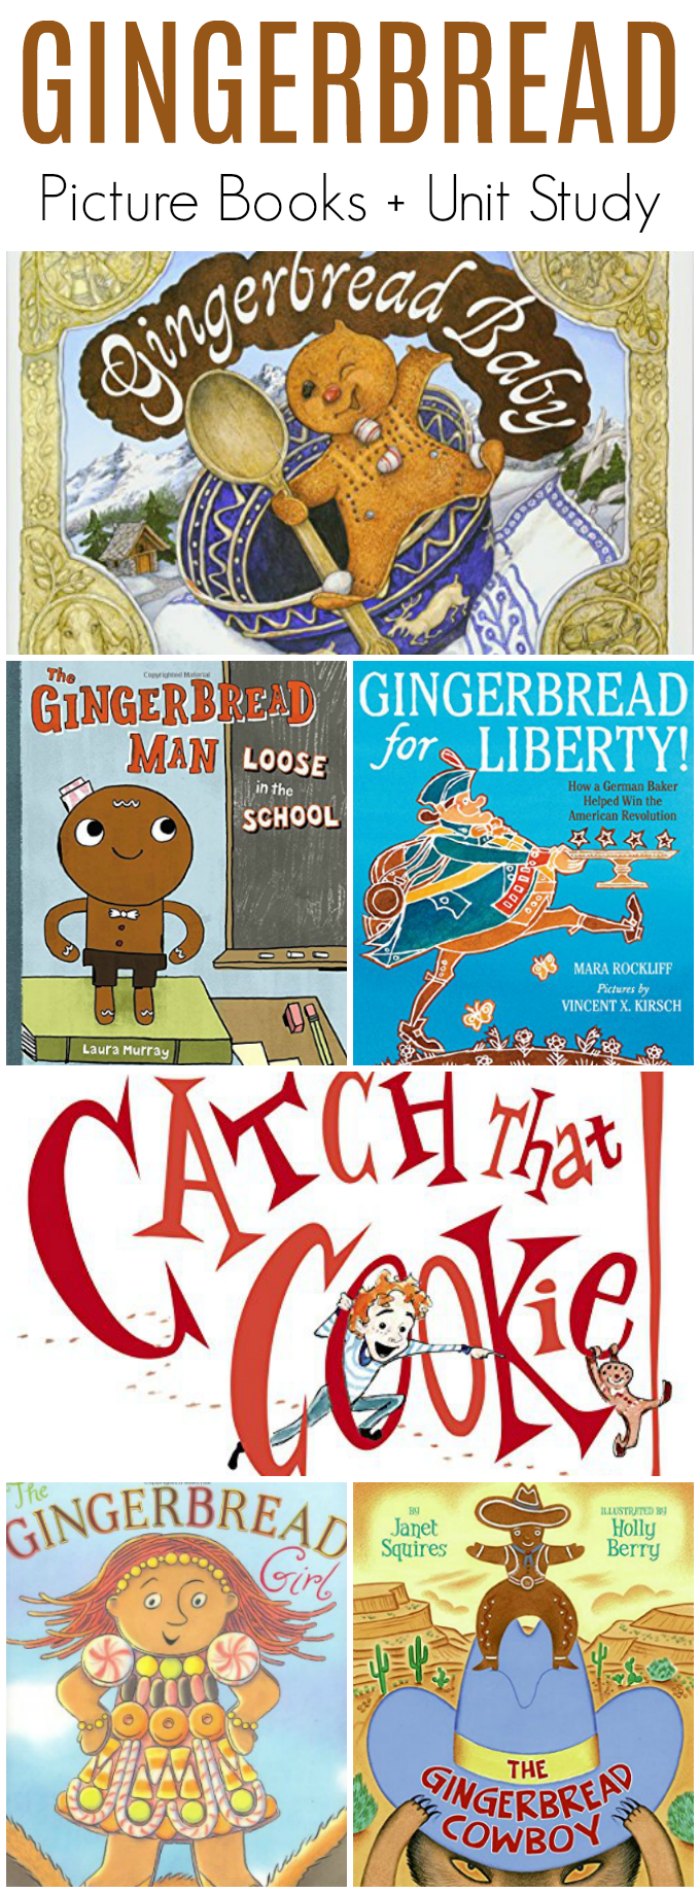 Gingerbread Books for Kids - Wonderfully fun picture books + Gingerbread Unit Study Ideas!